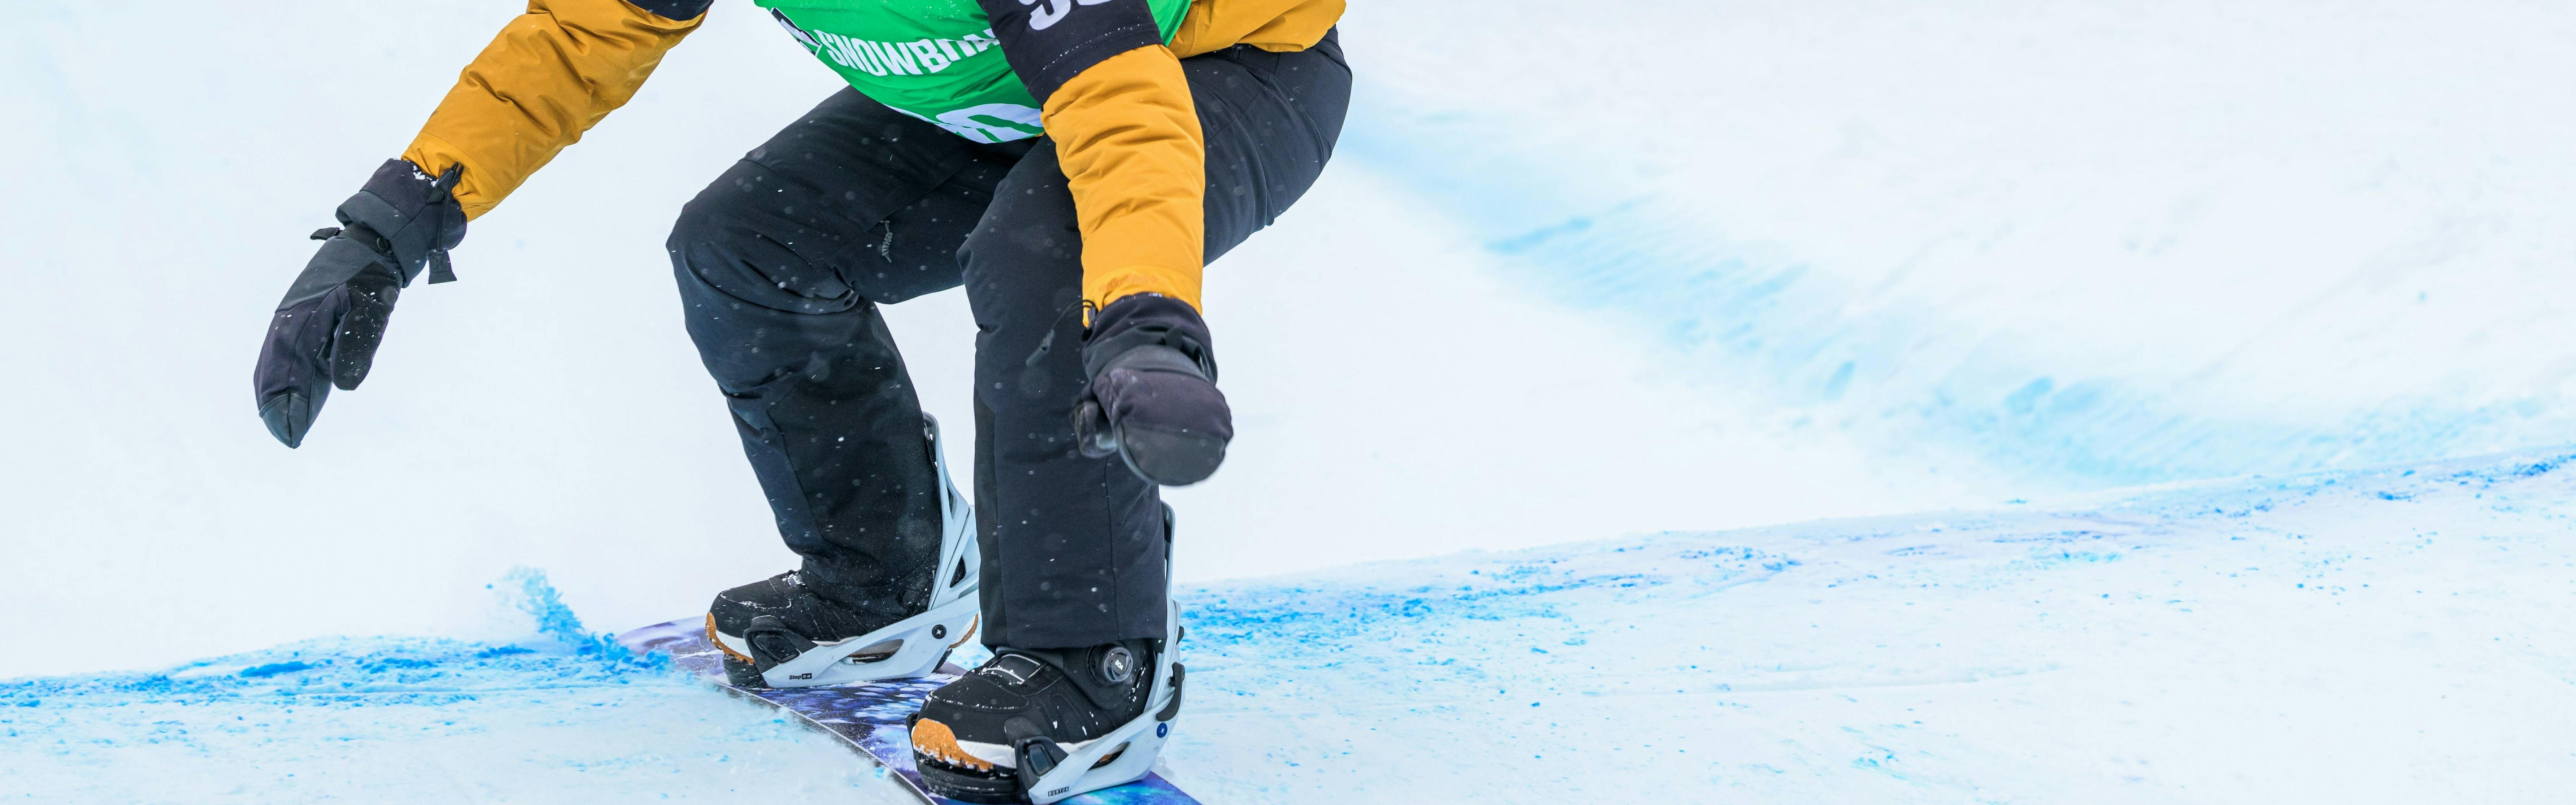 Rider in yellow jacket and green racing bib pumping over the roller section of a banked slalom course.